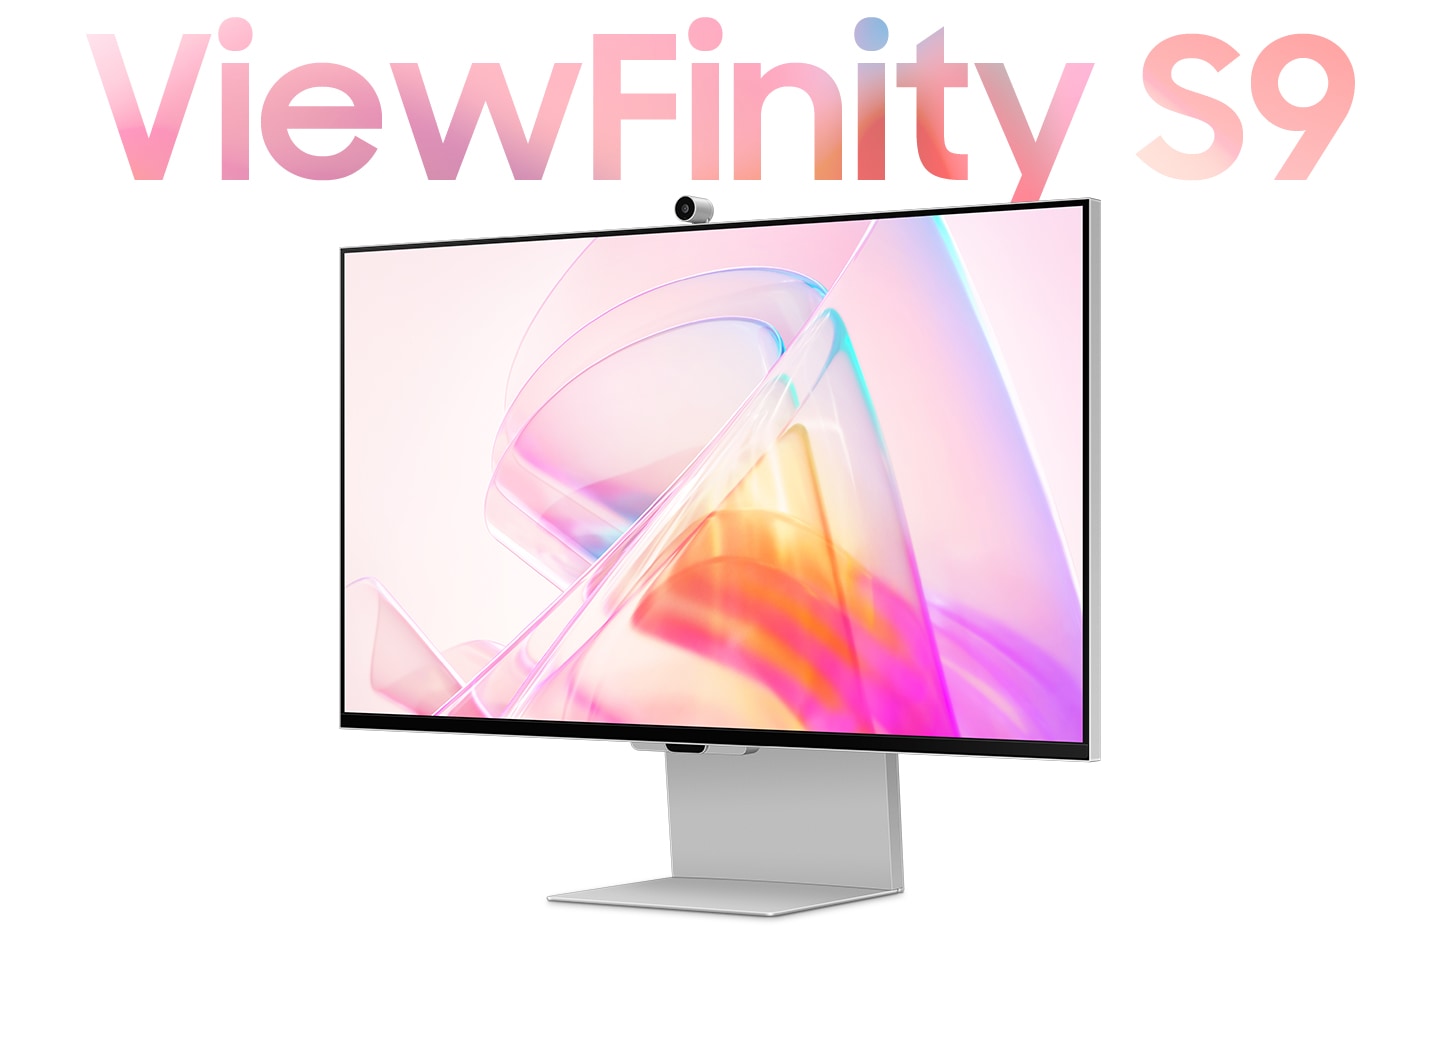 There is a monitor and some image and video editing tools appear with contents on it. Then, the monitor moves and its top is shown with 'ViewFinity S9' text around it.